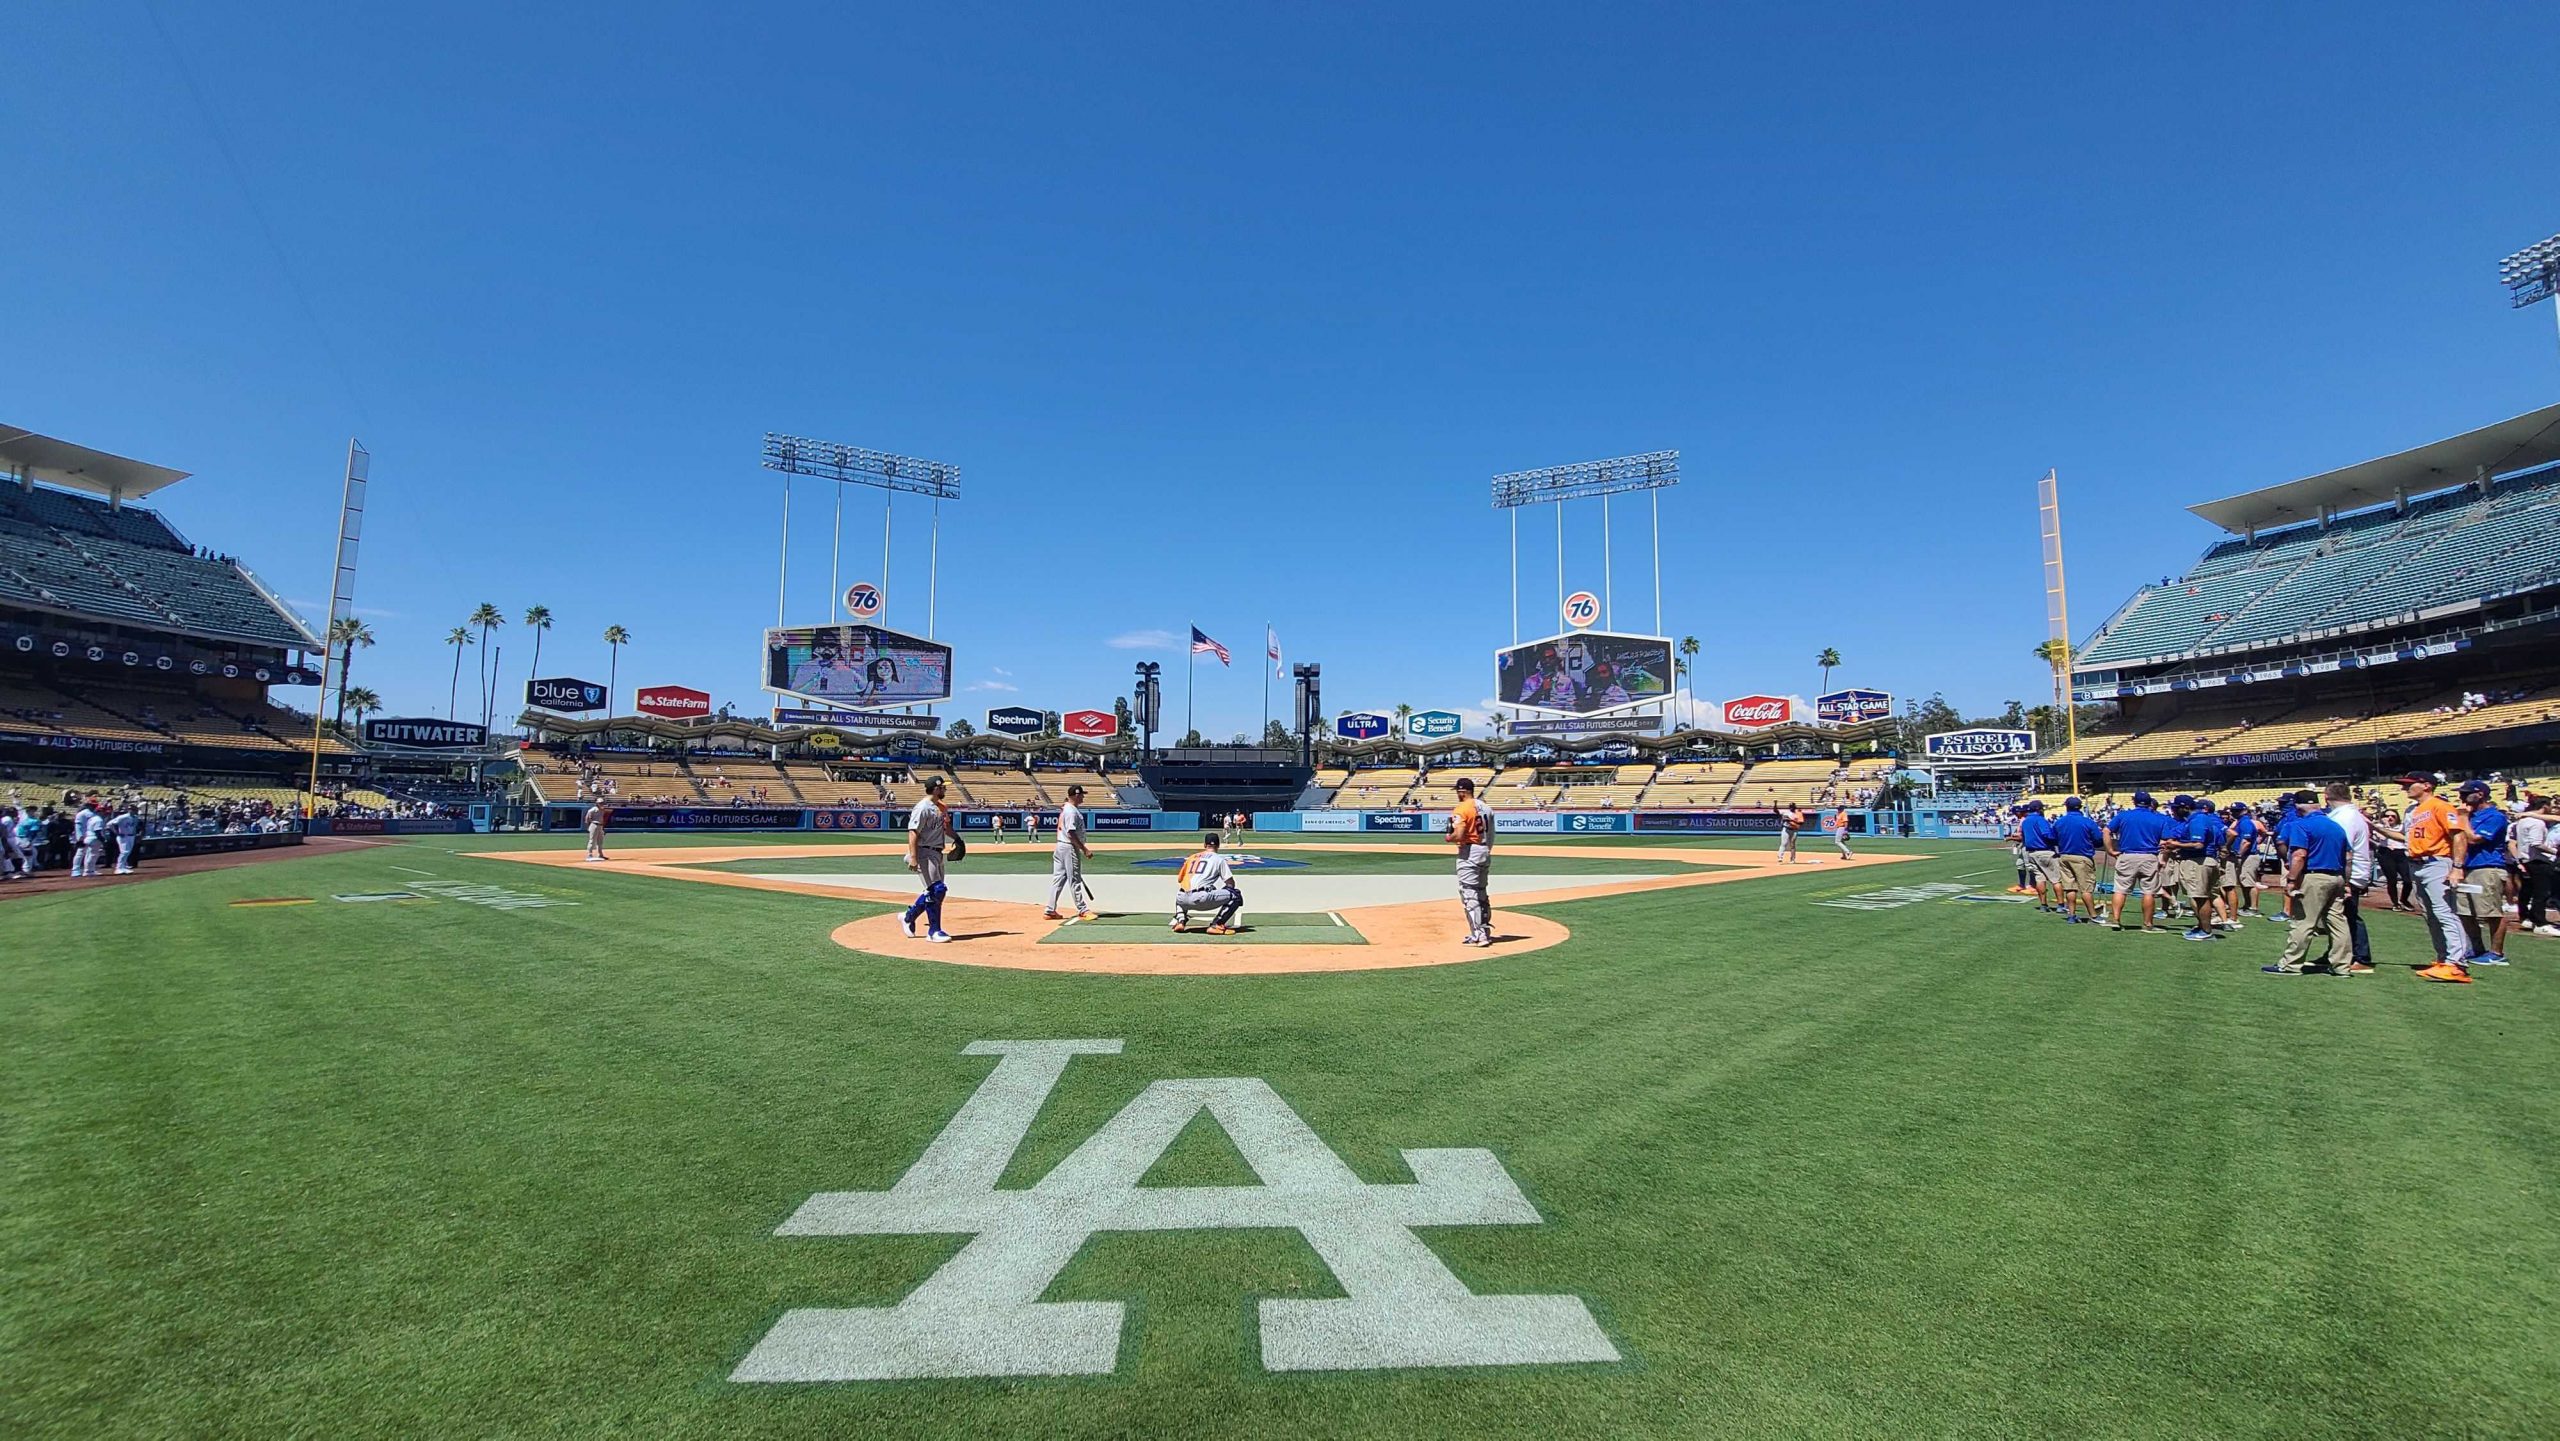 Live From MLB All-Star 2022: DodgerVision Churns Out In-Venue Entertainment  for Multiple Events